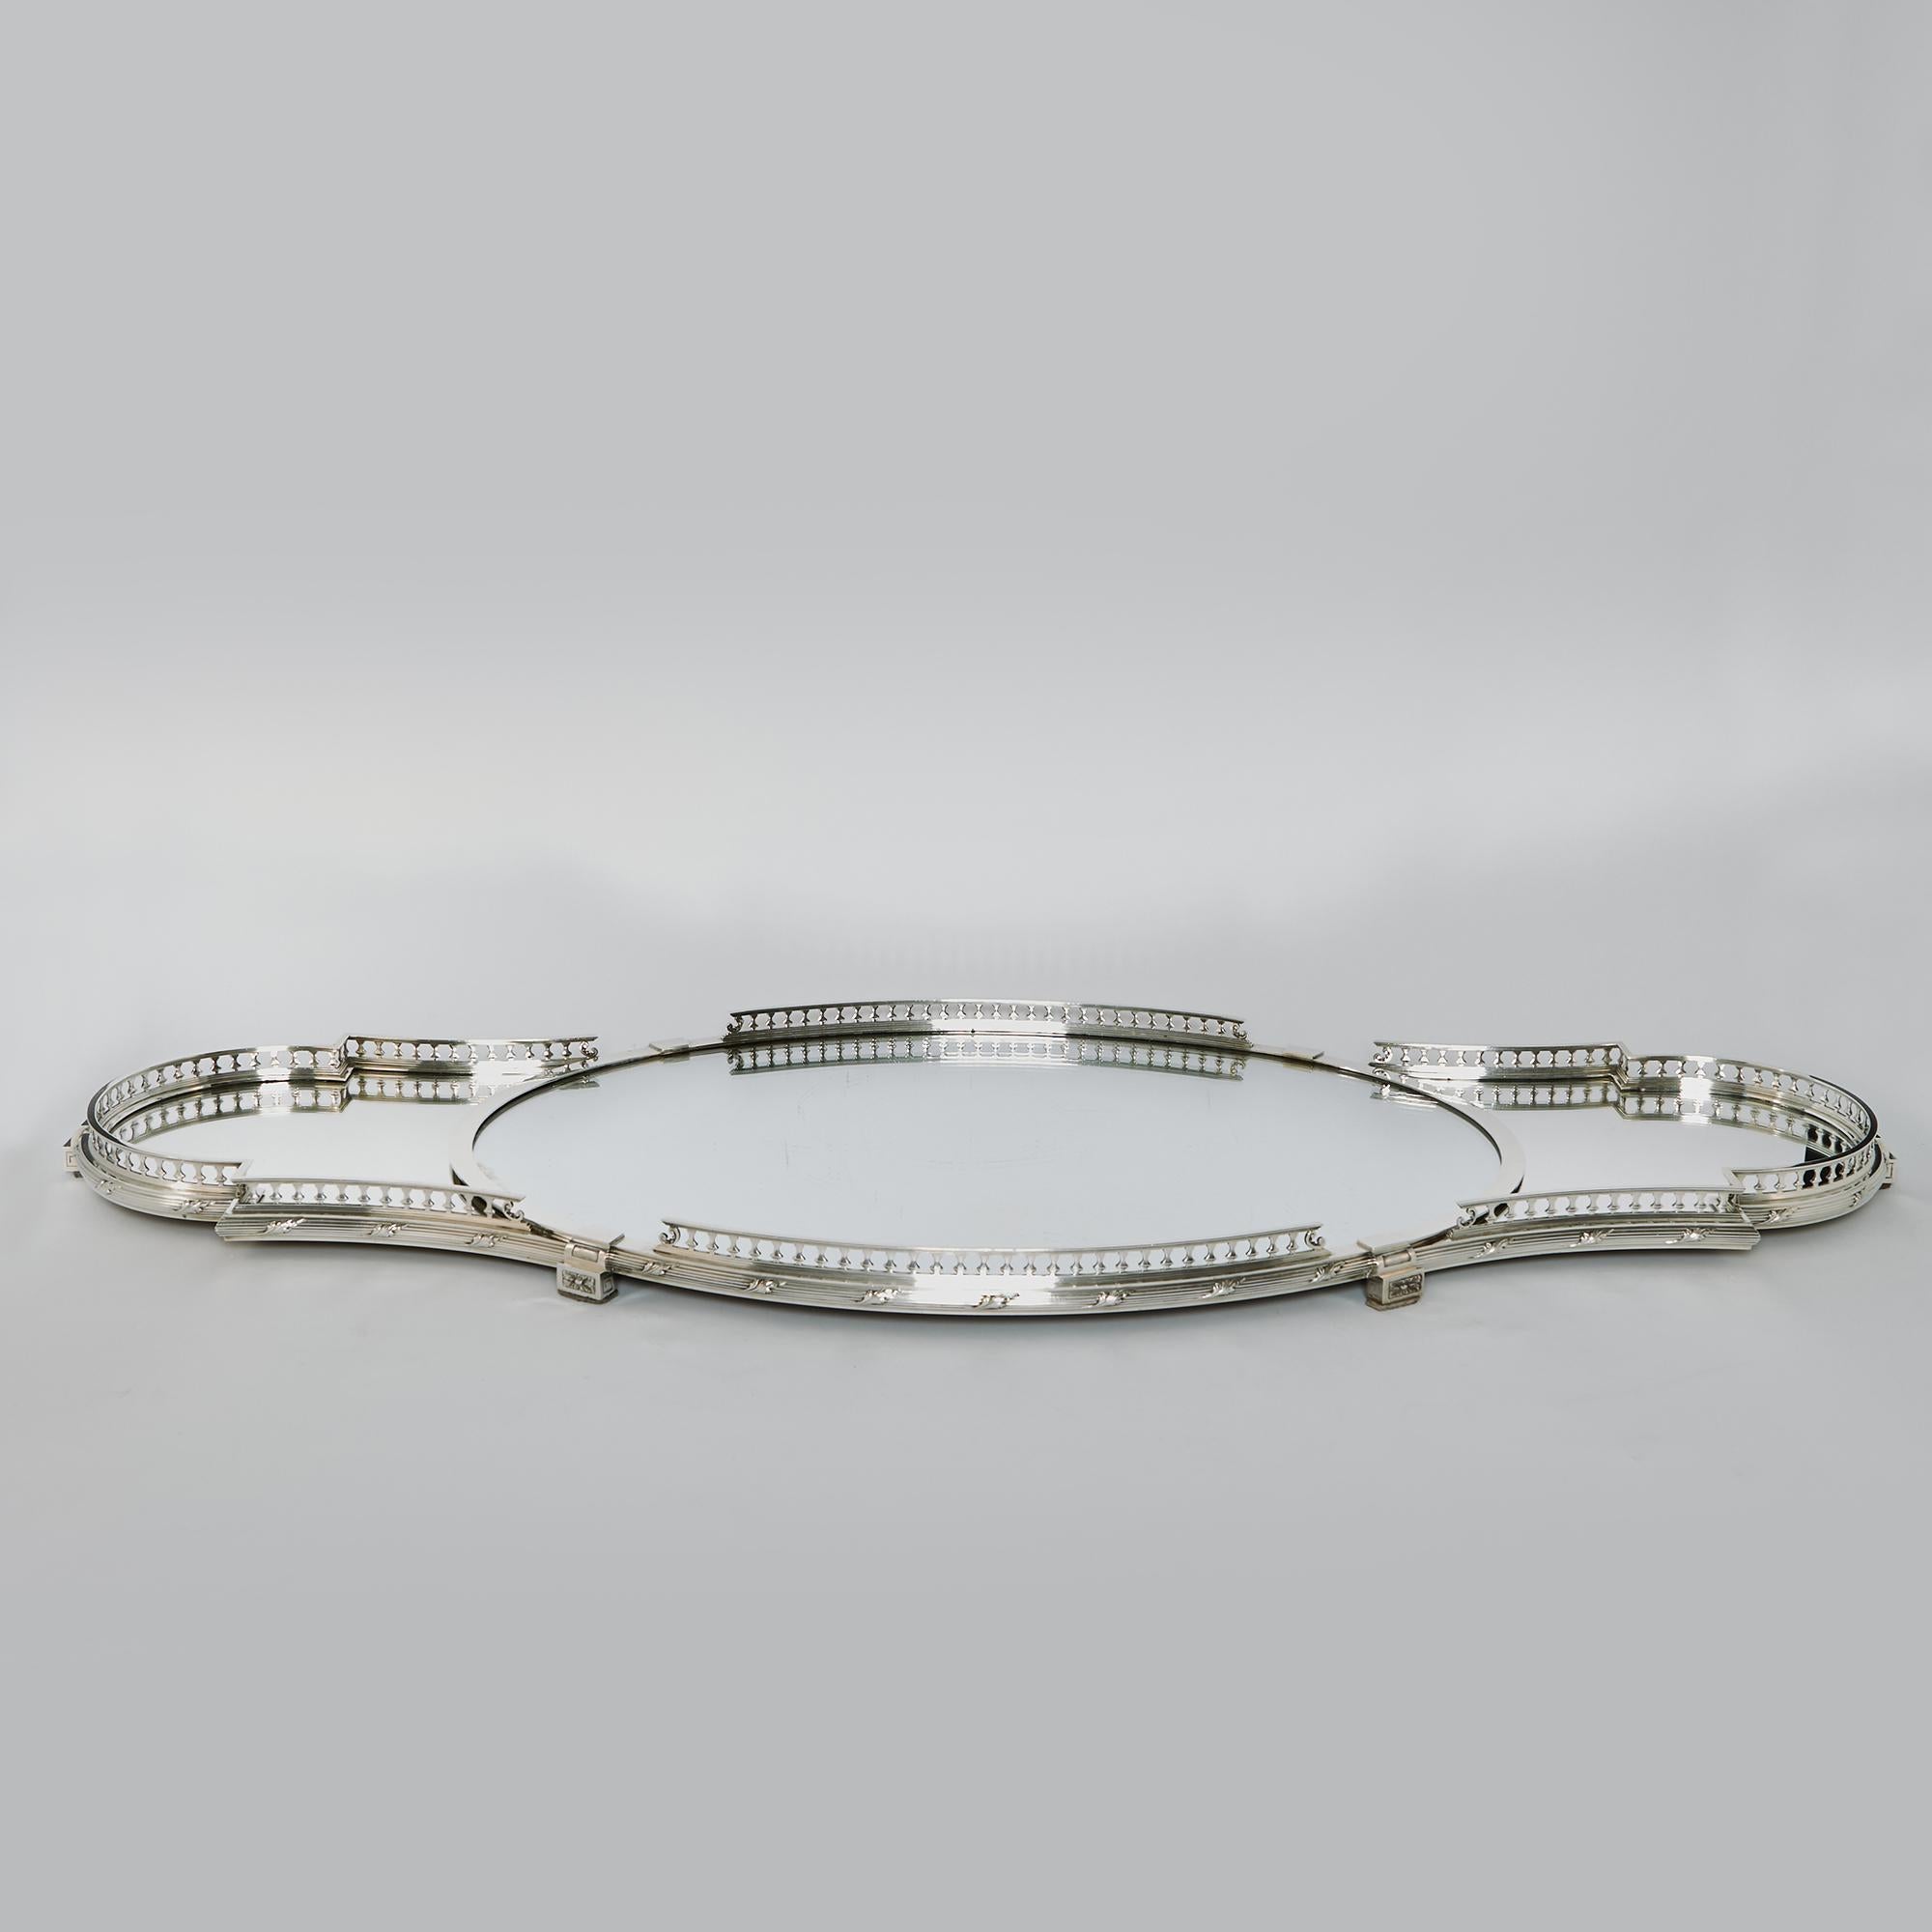 Stunning three-piece mirrored plateau made in French 1st Standard silver (950/1000). The large central oval plateau and two shaped side sections feature raised galleries with baluster supports and a band of ribbon and reed pattern silver decoration